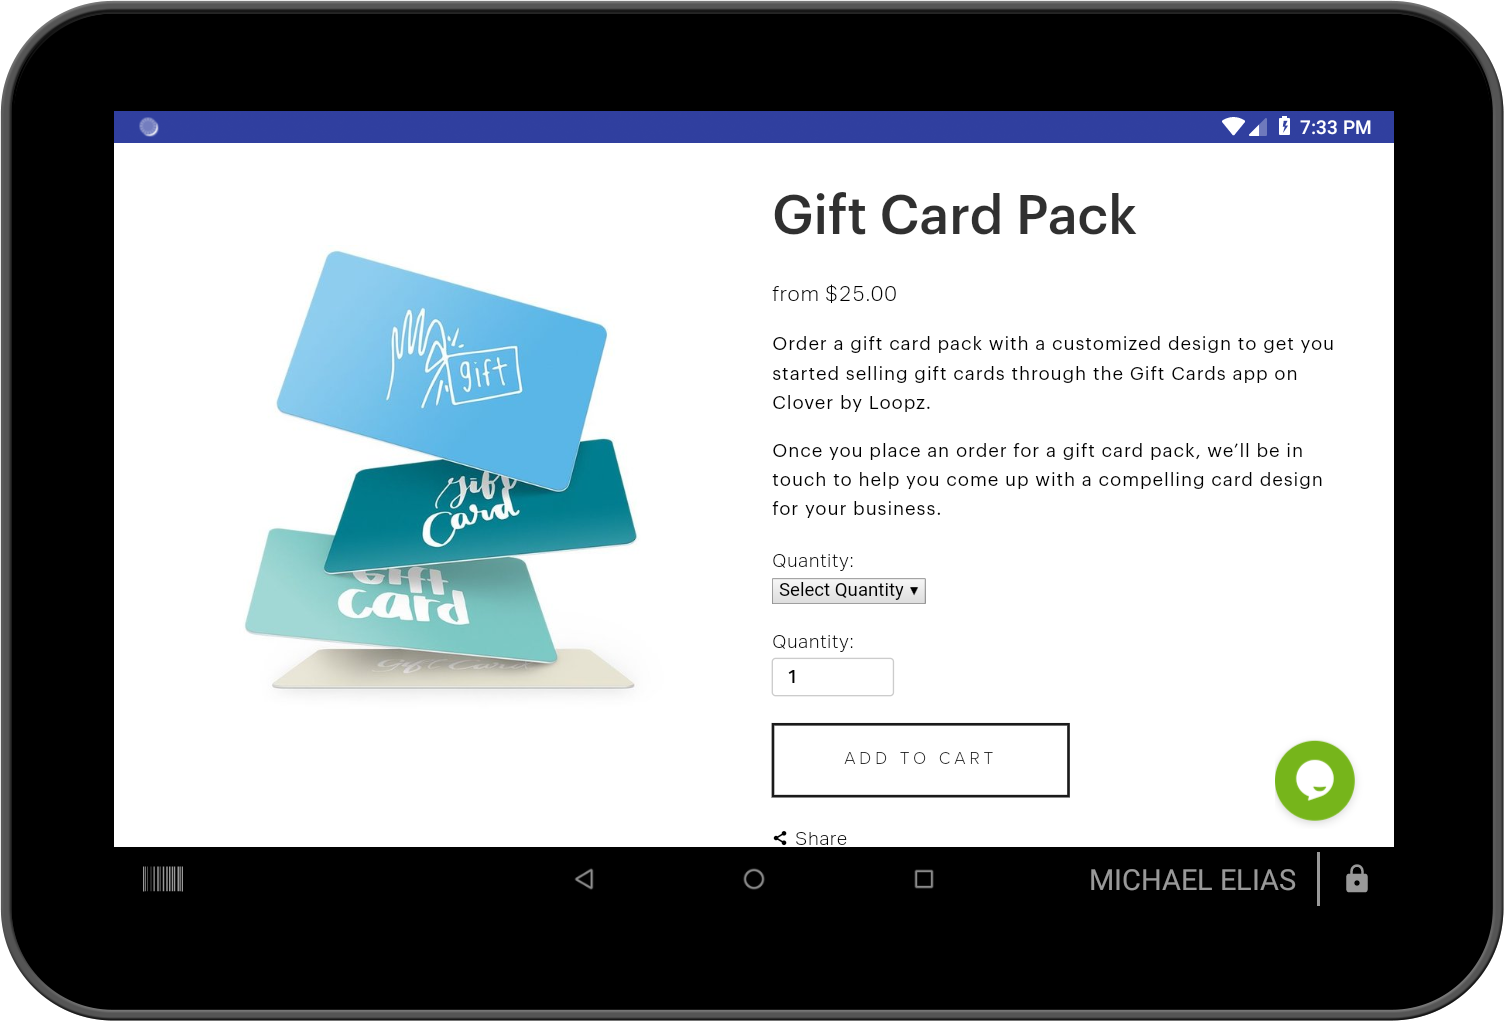 order-gift-card-pack.png